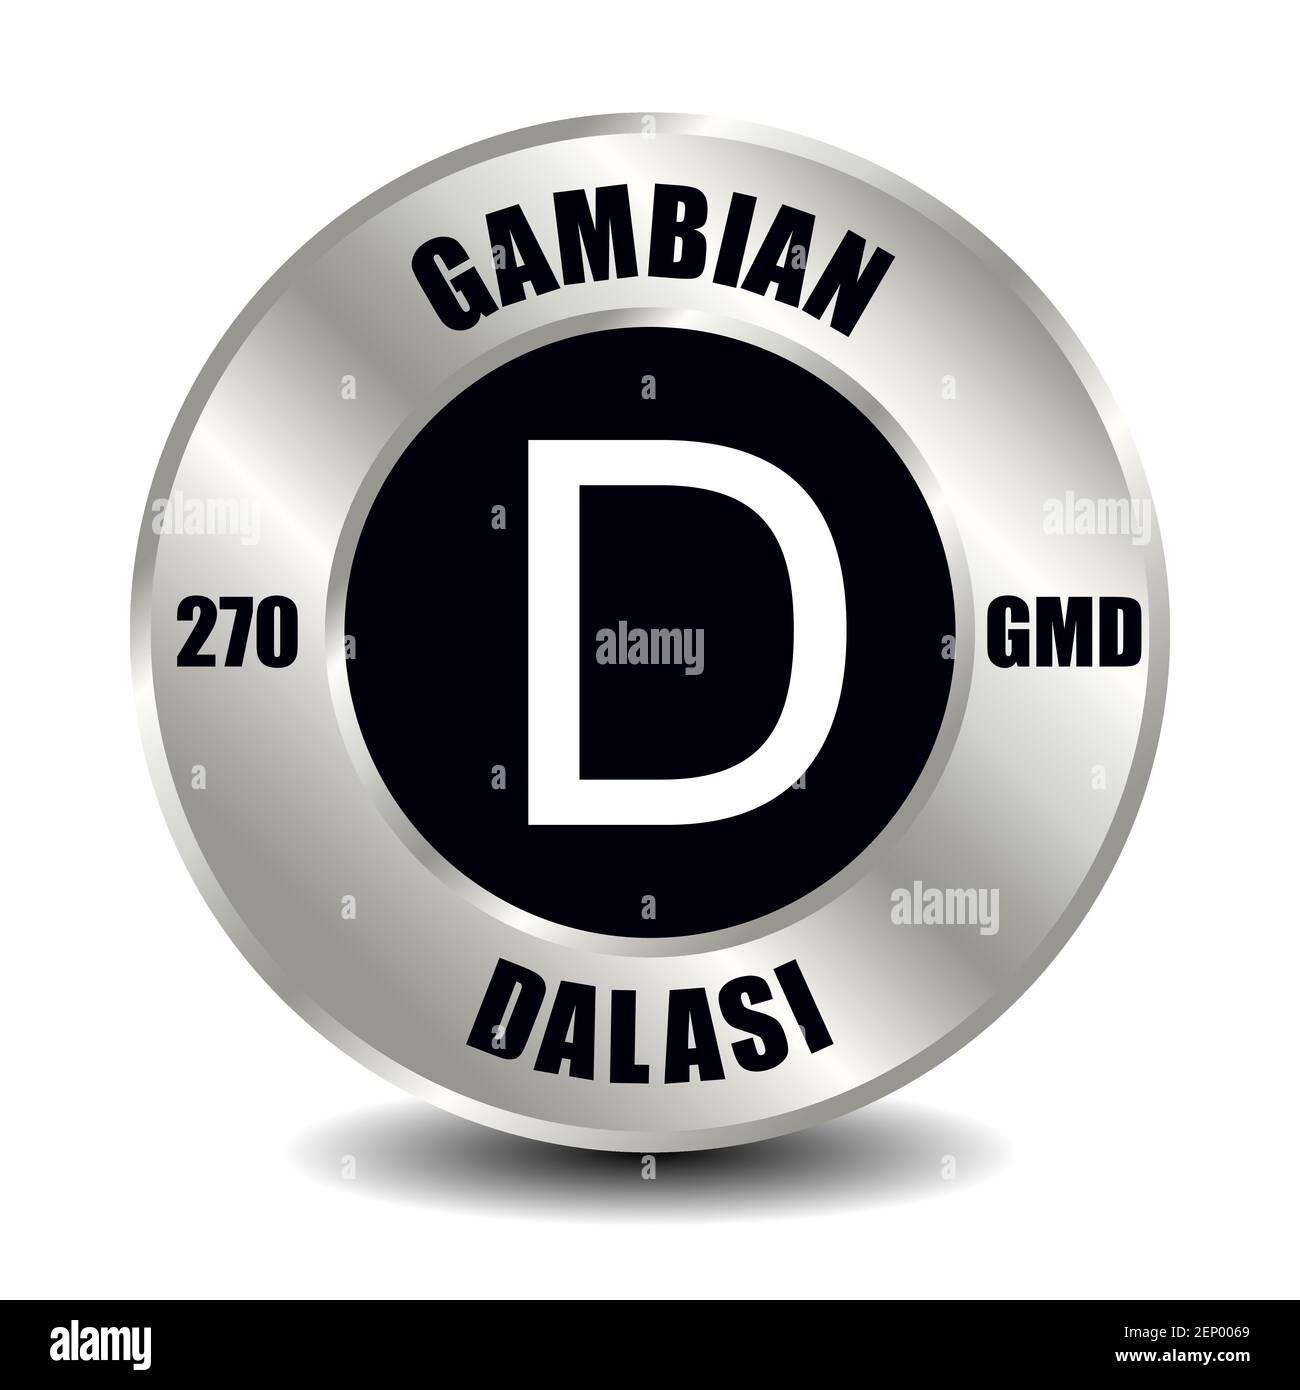 Gambia money icon isolated on round silver coin. Vector sign of currency symbol with international ISO code and abbreviation Stock Vector